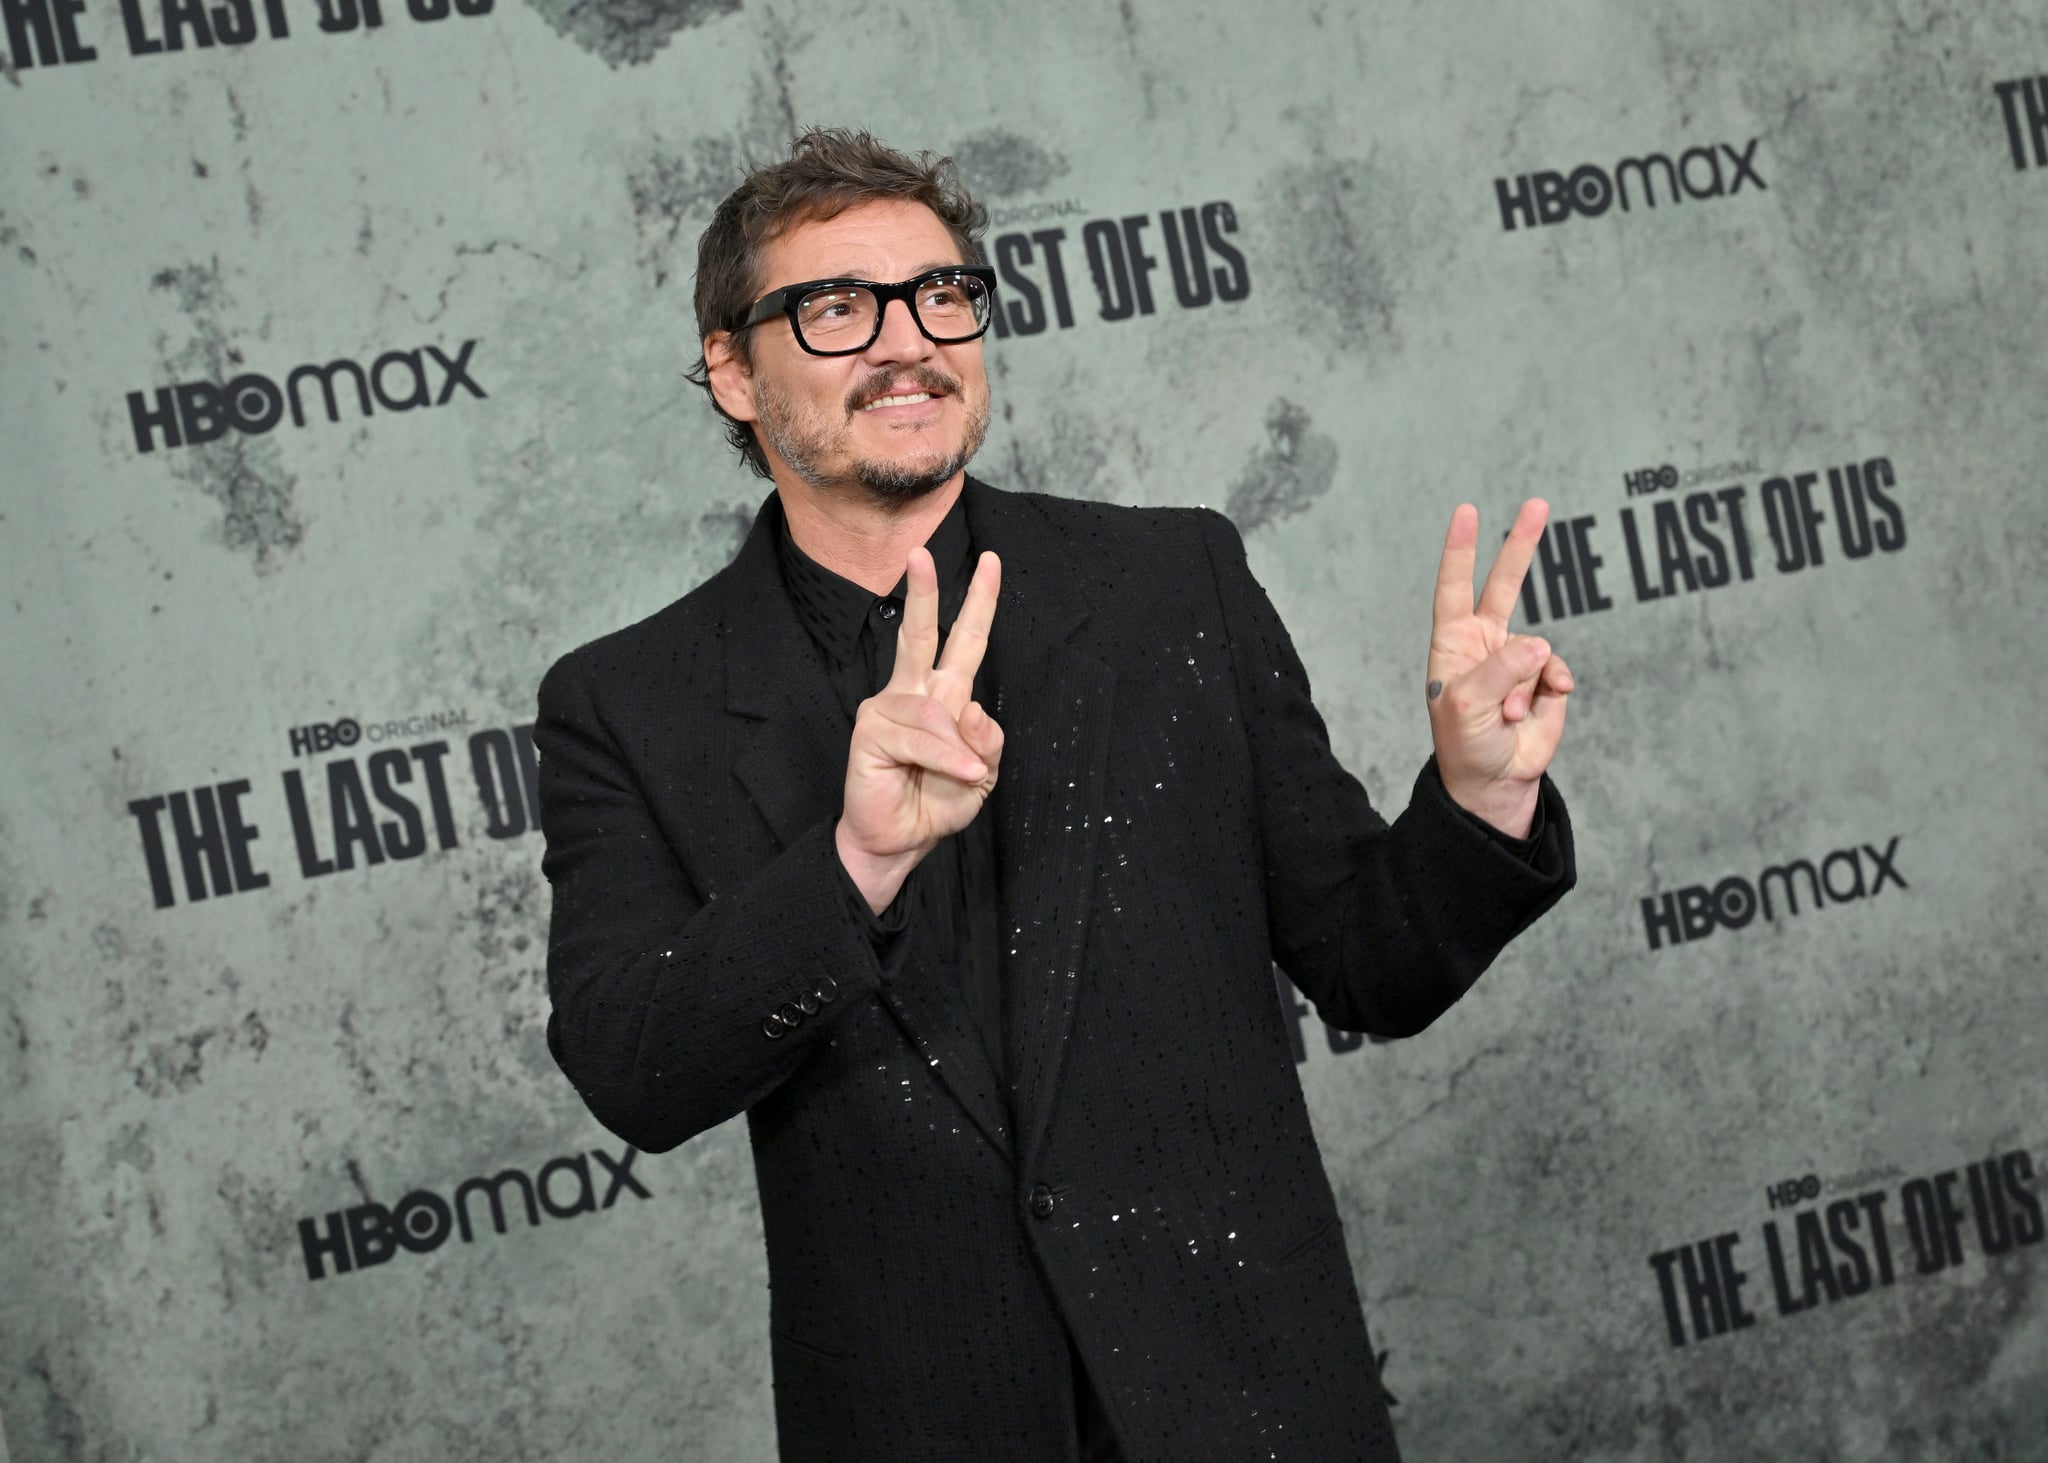 Pedro Pascal at the last of us premiere